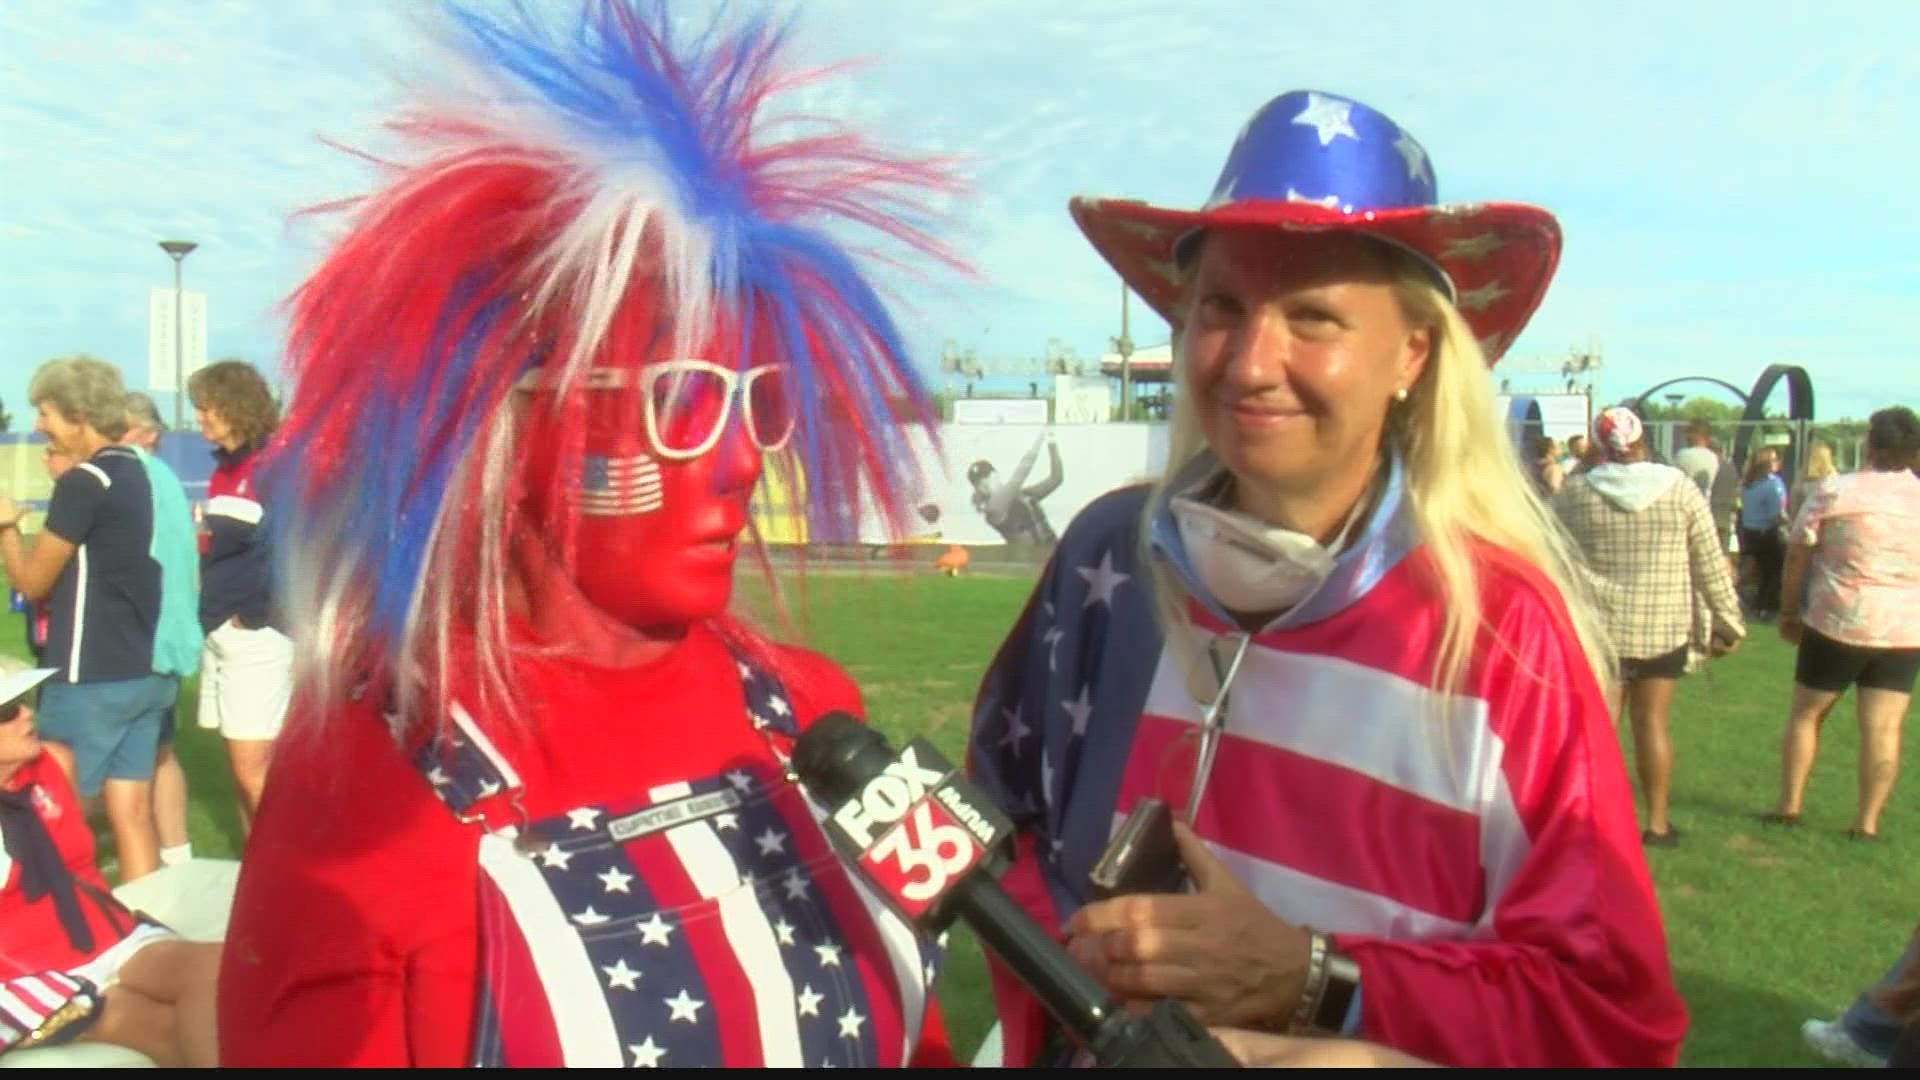 People from all over the world gathered in Downtown Toledo near Promenade Park to celebrate the Solheim Cup's Fan Fest.